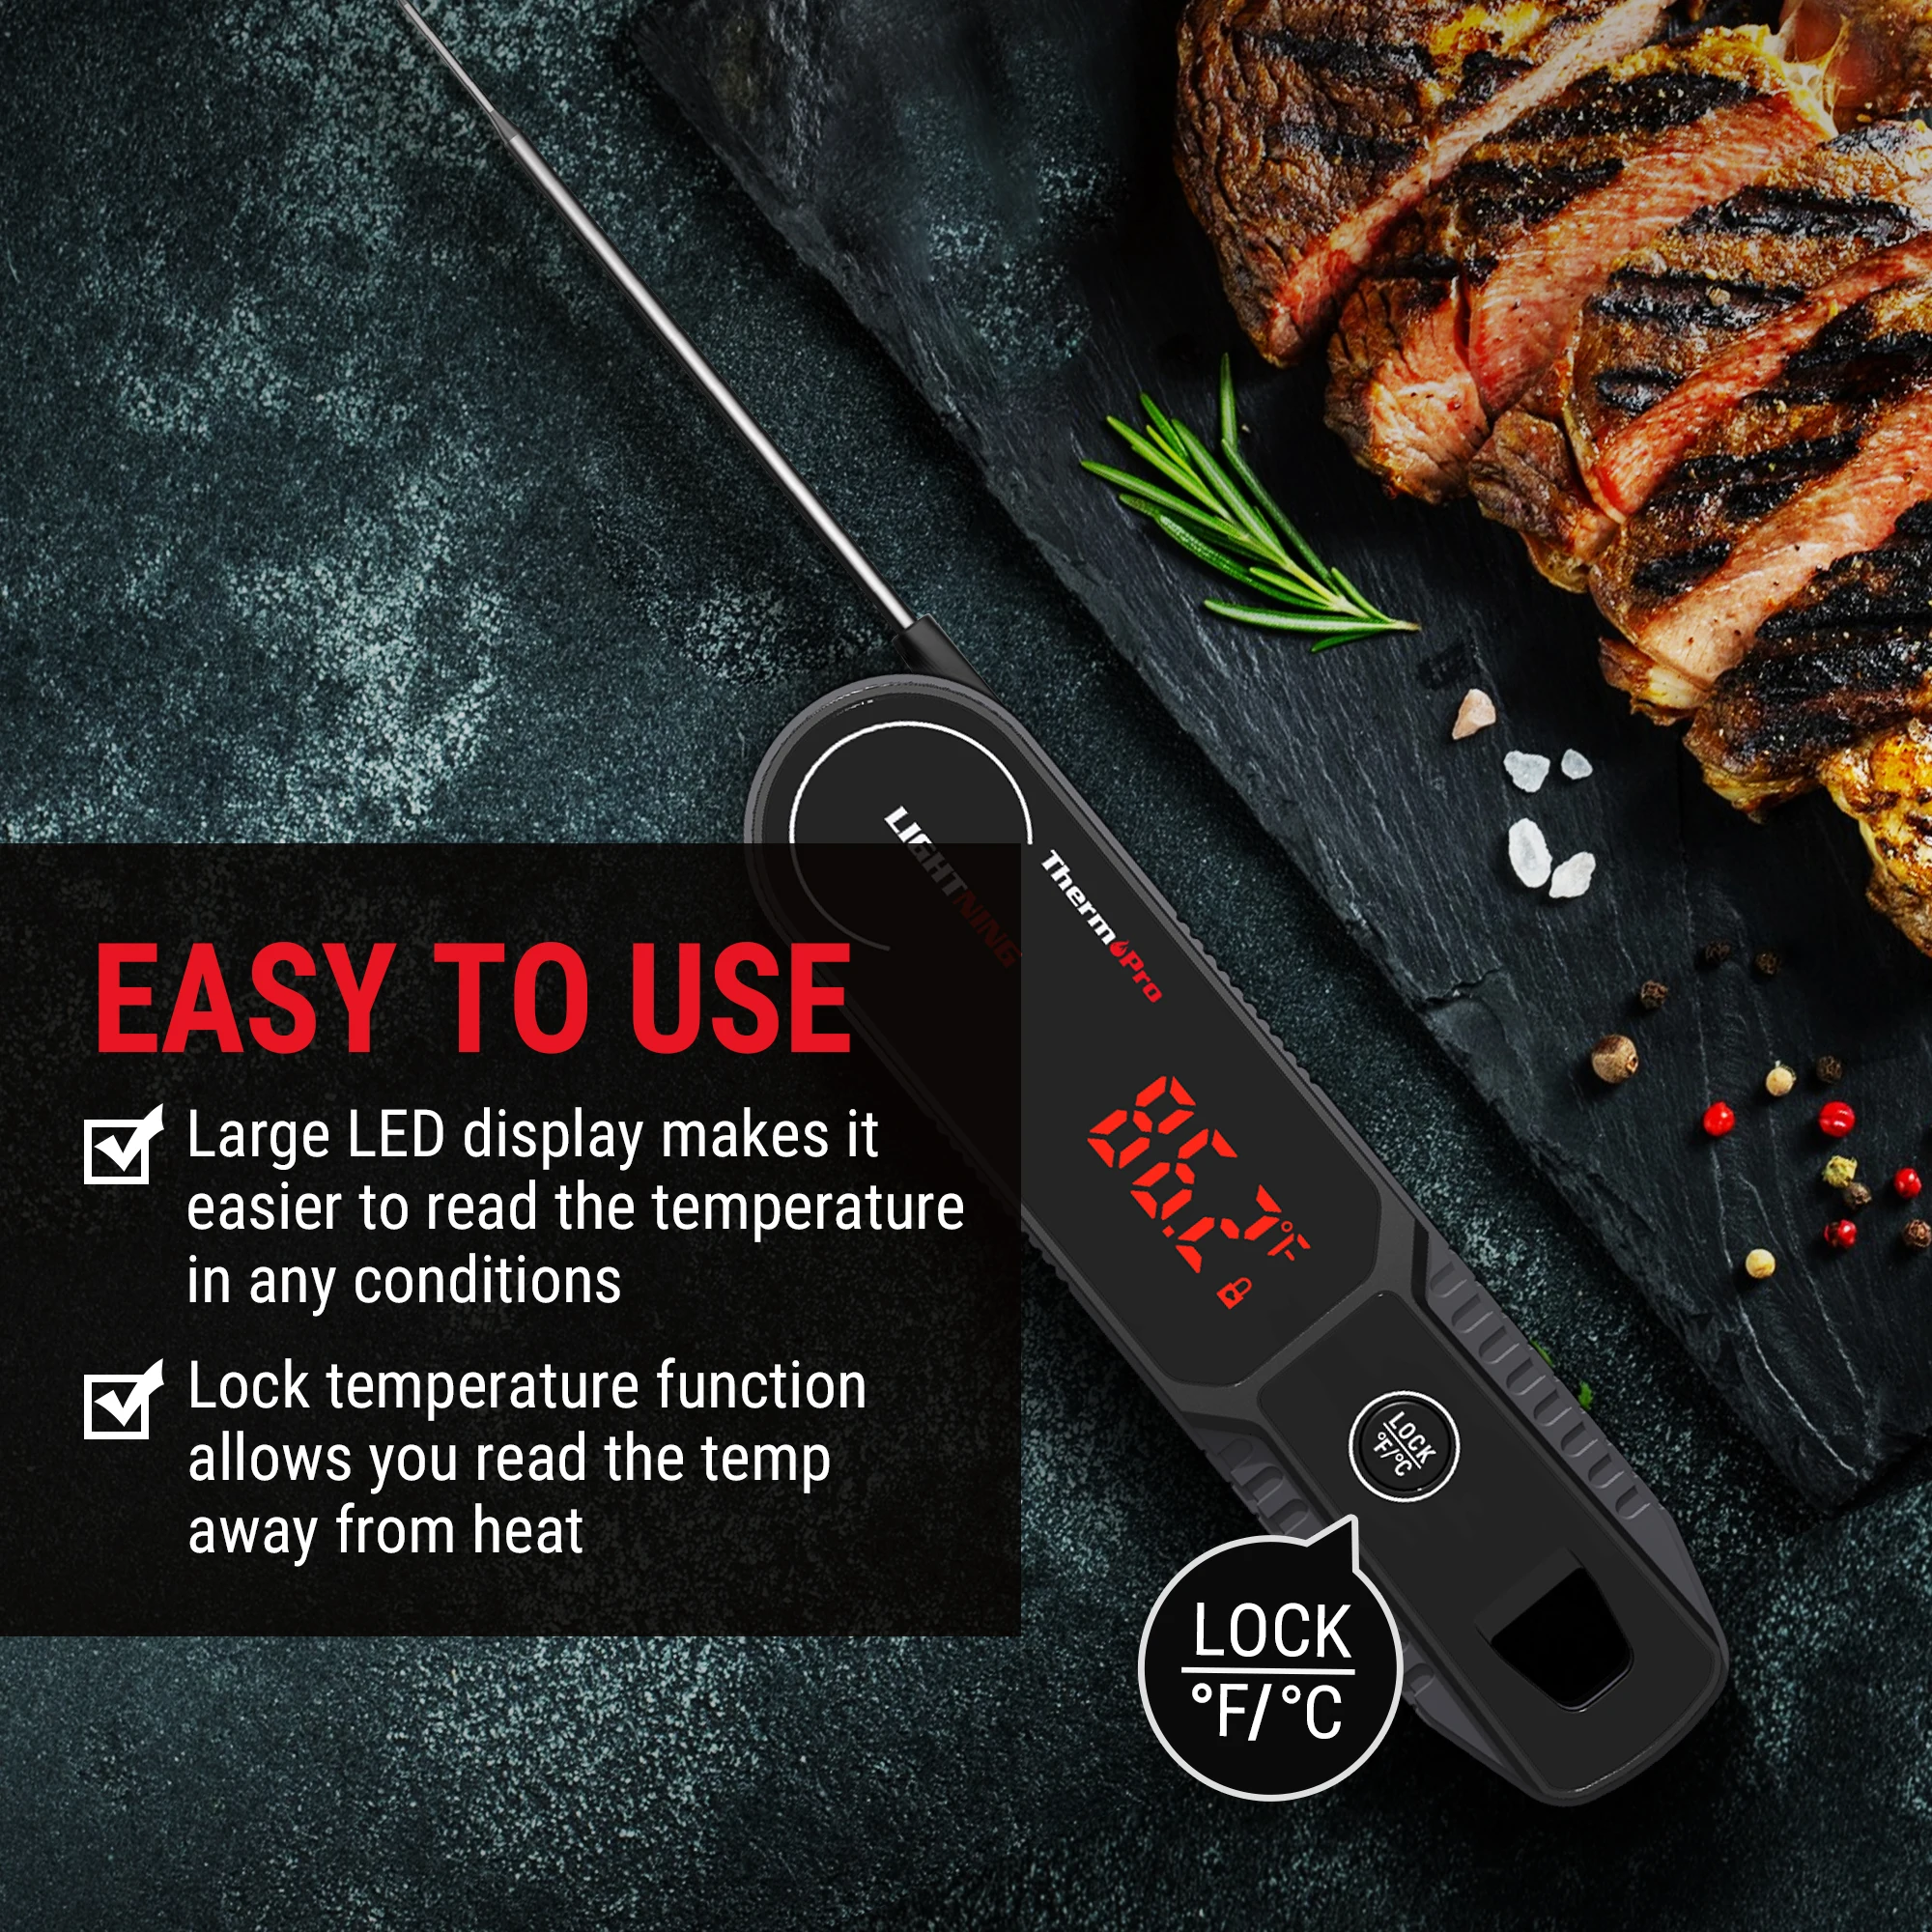 https://ae01.alicdn.com/kf/S34d582cf6f53484c9e77b0d33d98c6beW/ThermoPro-TP622-Instant-Reading-Waterproof-Digital-BBQ-Thermometer-With-Gravity-Automatic-Rotating-Disply-For-Meat-Cooking.jpg